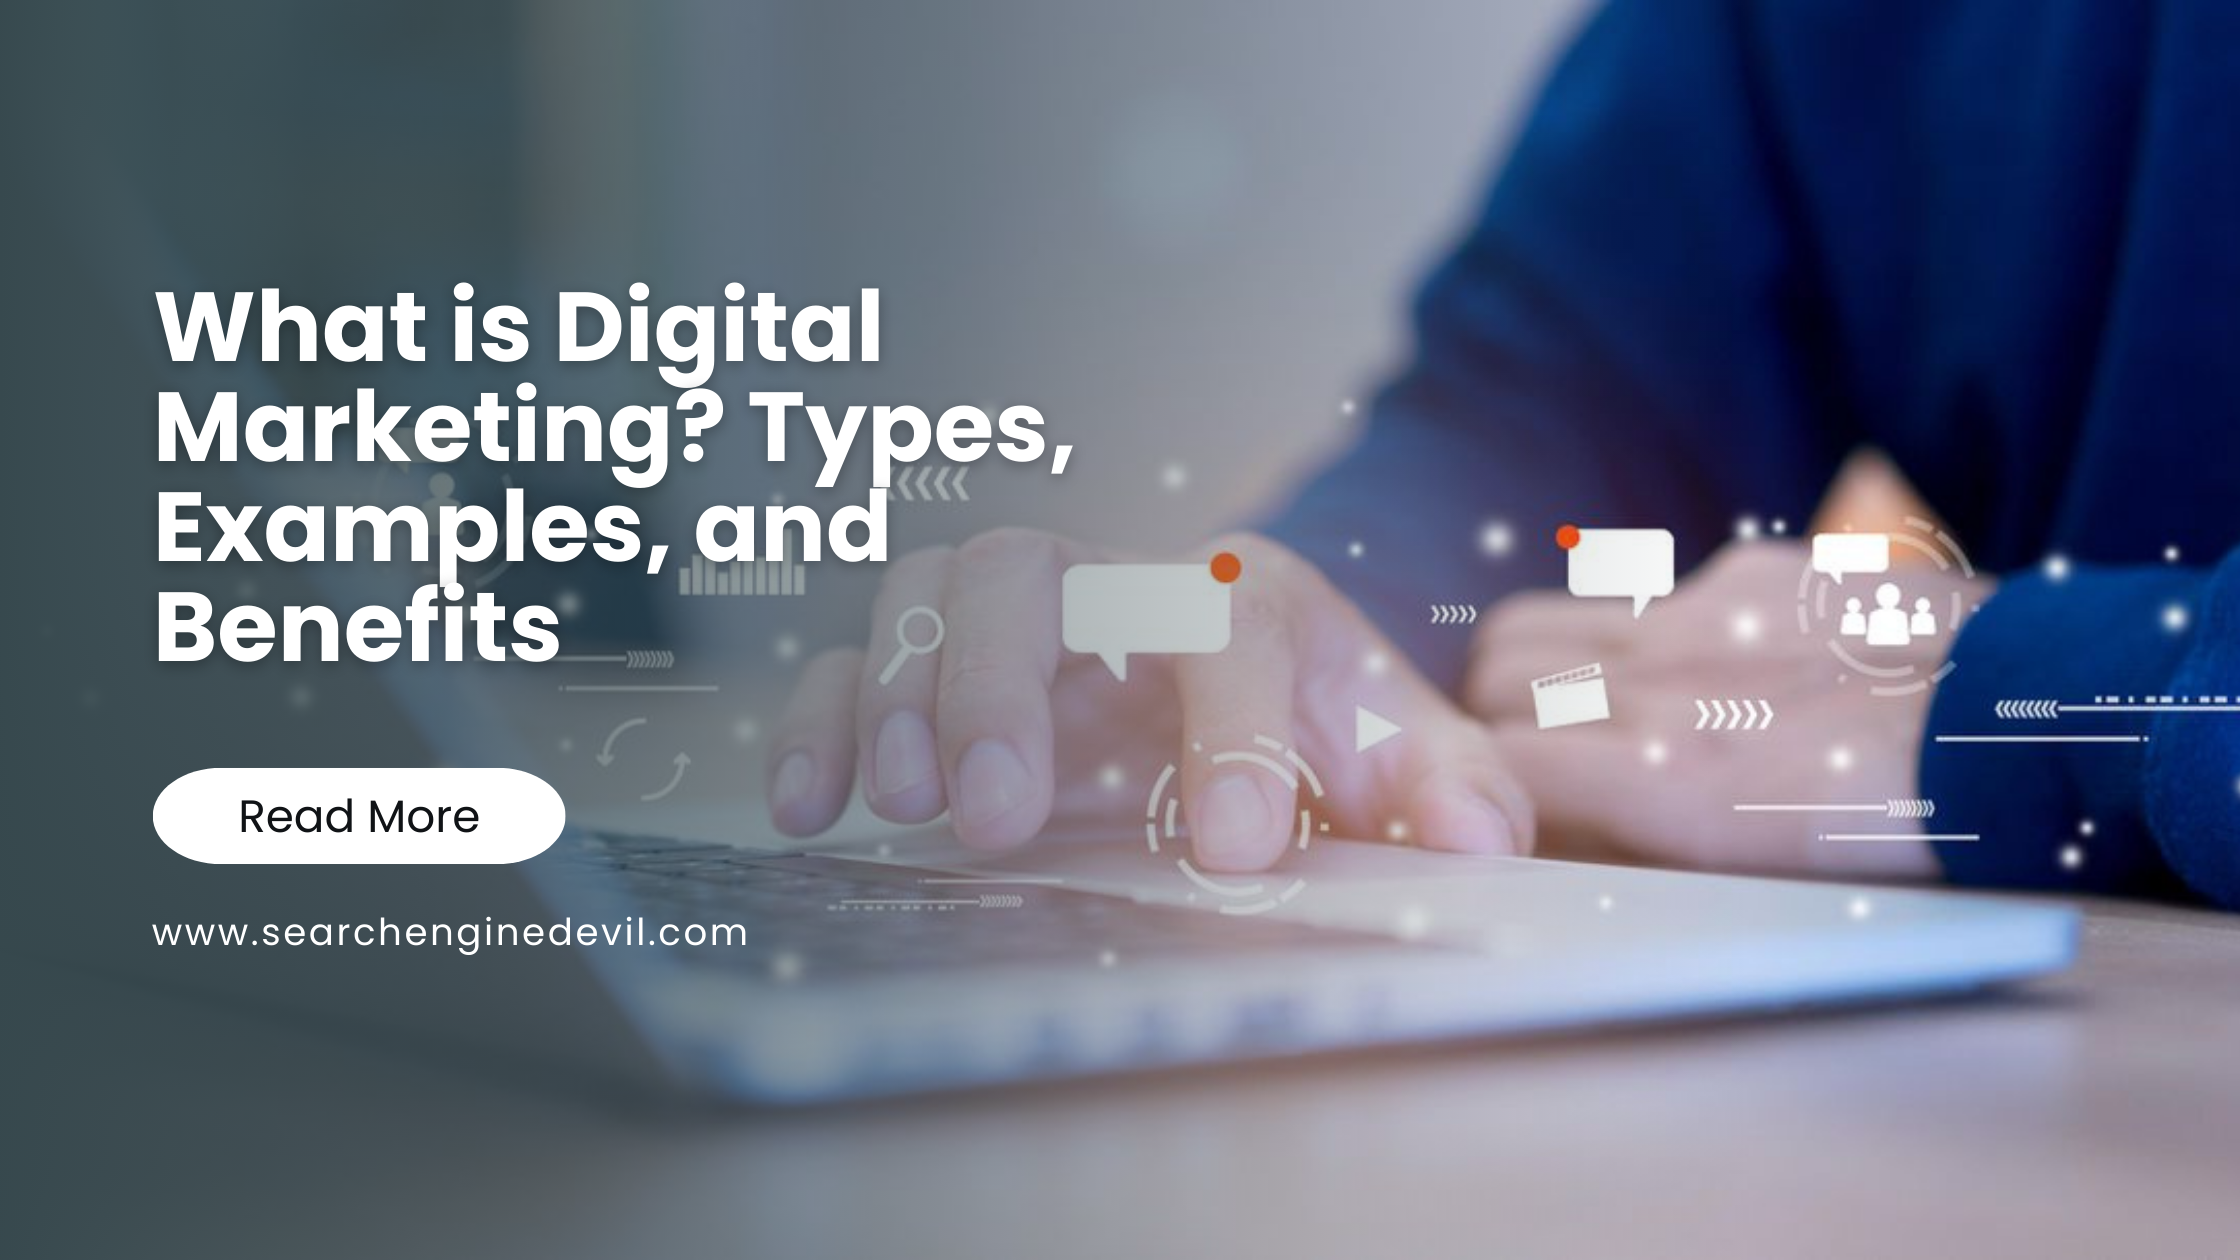 What is Digital Marketing Types, Examples, and Benefits